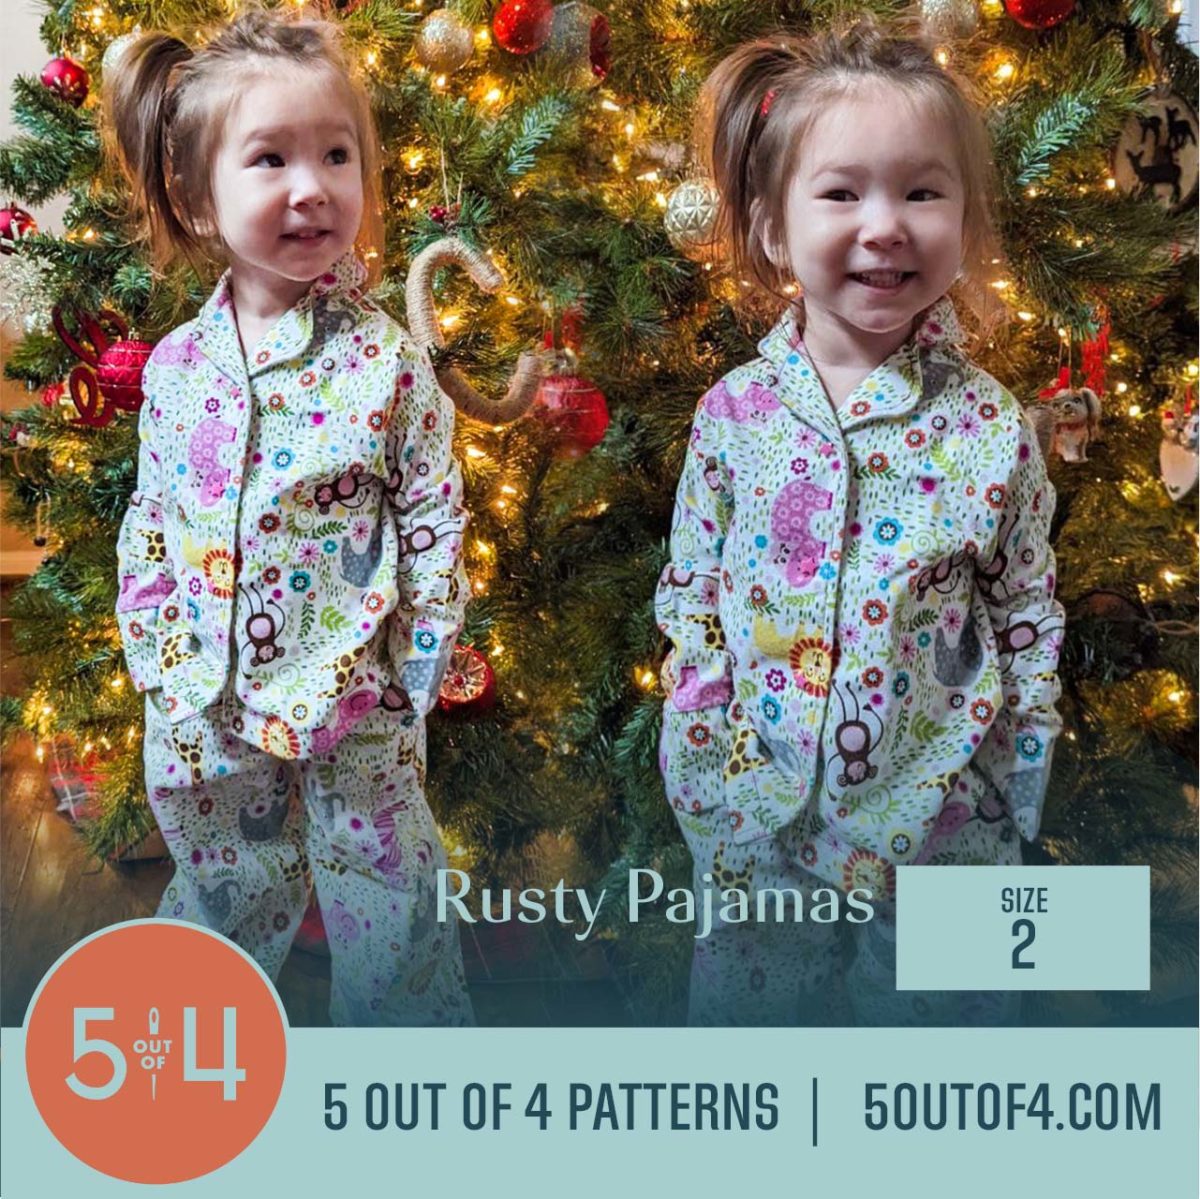 5oo4 Woven Pajama Pattern for Kids size 2